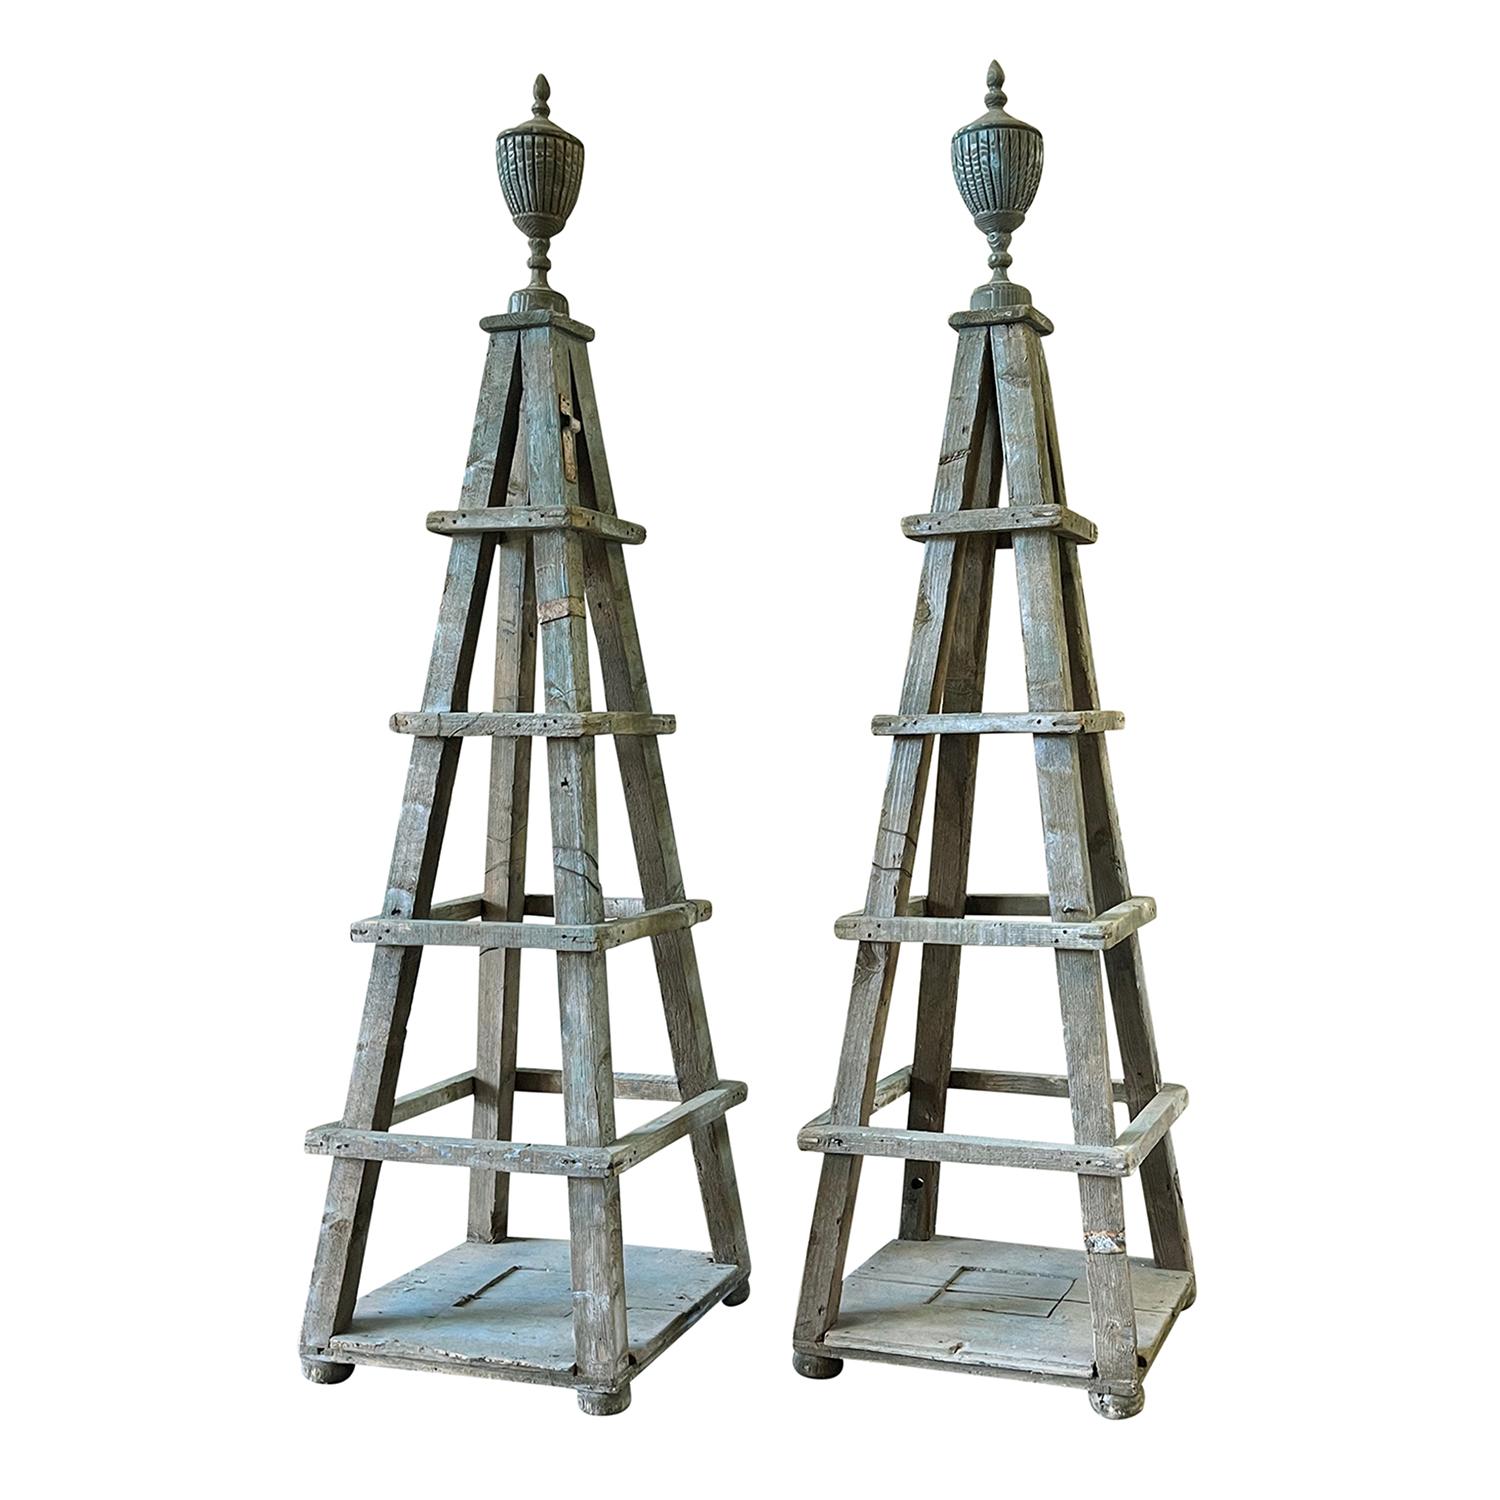 An antique French pair of tall garden trellis obelisks in faded Versailles green topped by urn finials, in good condition. An antique Architectural ornament for the indoors or outdoors. Made of hand carved Pinewood. Minor fading, due to age. Wear